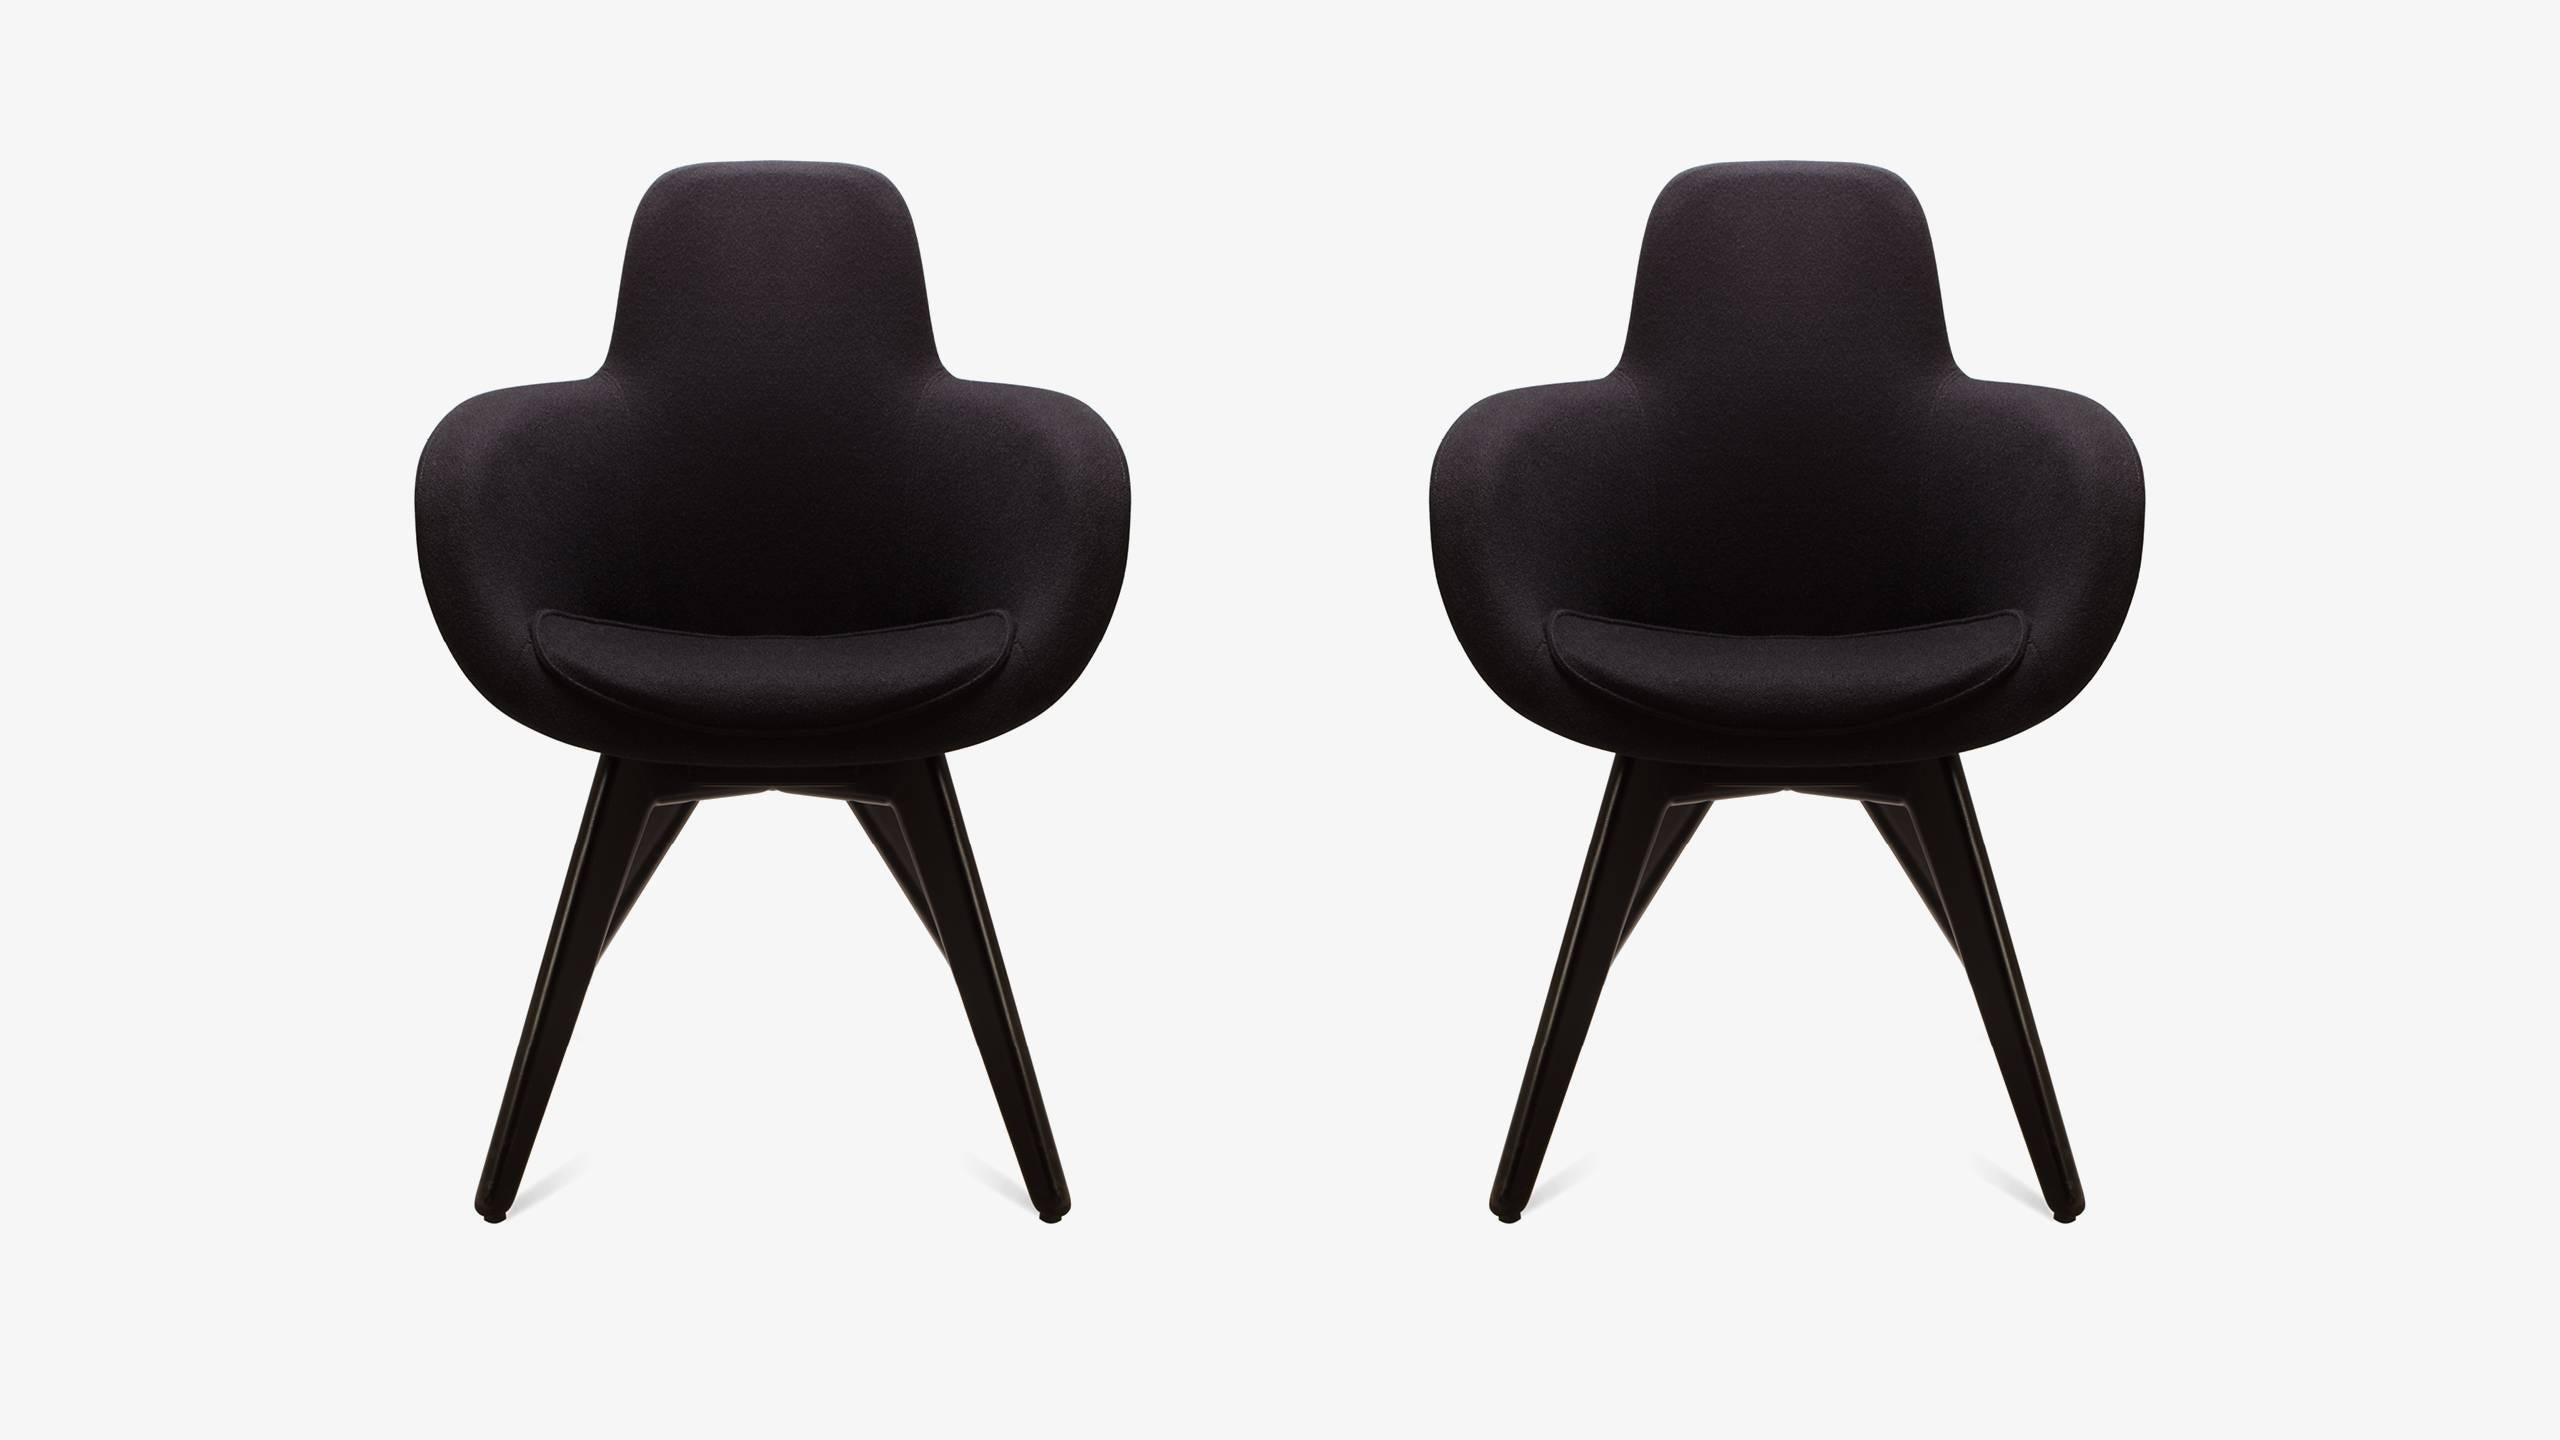 Tom Dixon is a master in marrying organic and geometric design, ringing true with his Scoop chair series. These chairs combine a fluid upholstered top with an architectural four-leg wood base. The tops are crafted from injection molded foam that is